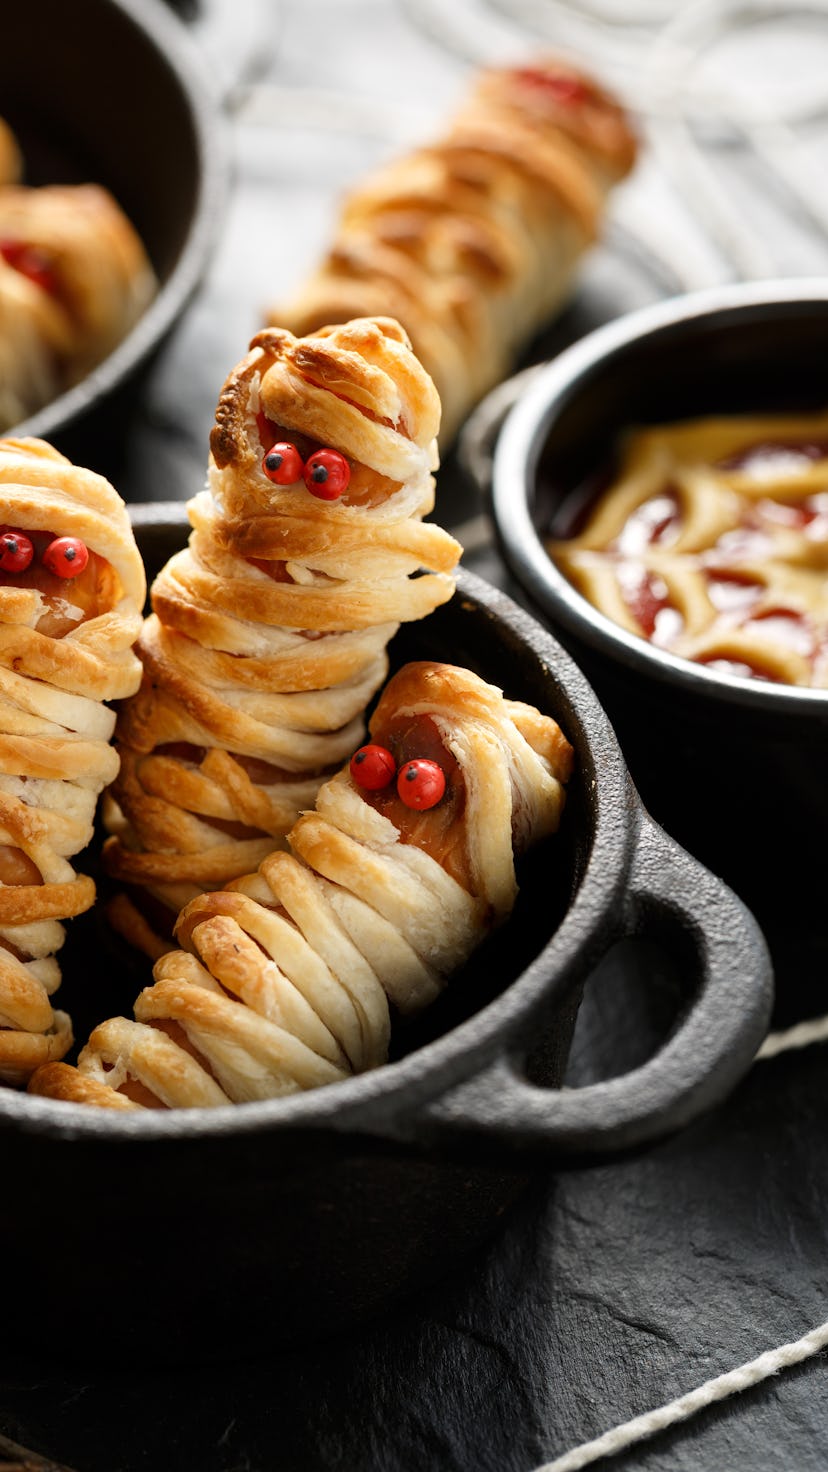 Mummy dogs close up view. Halloween food idea for  party